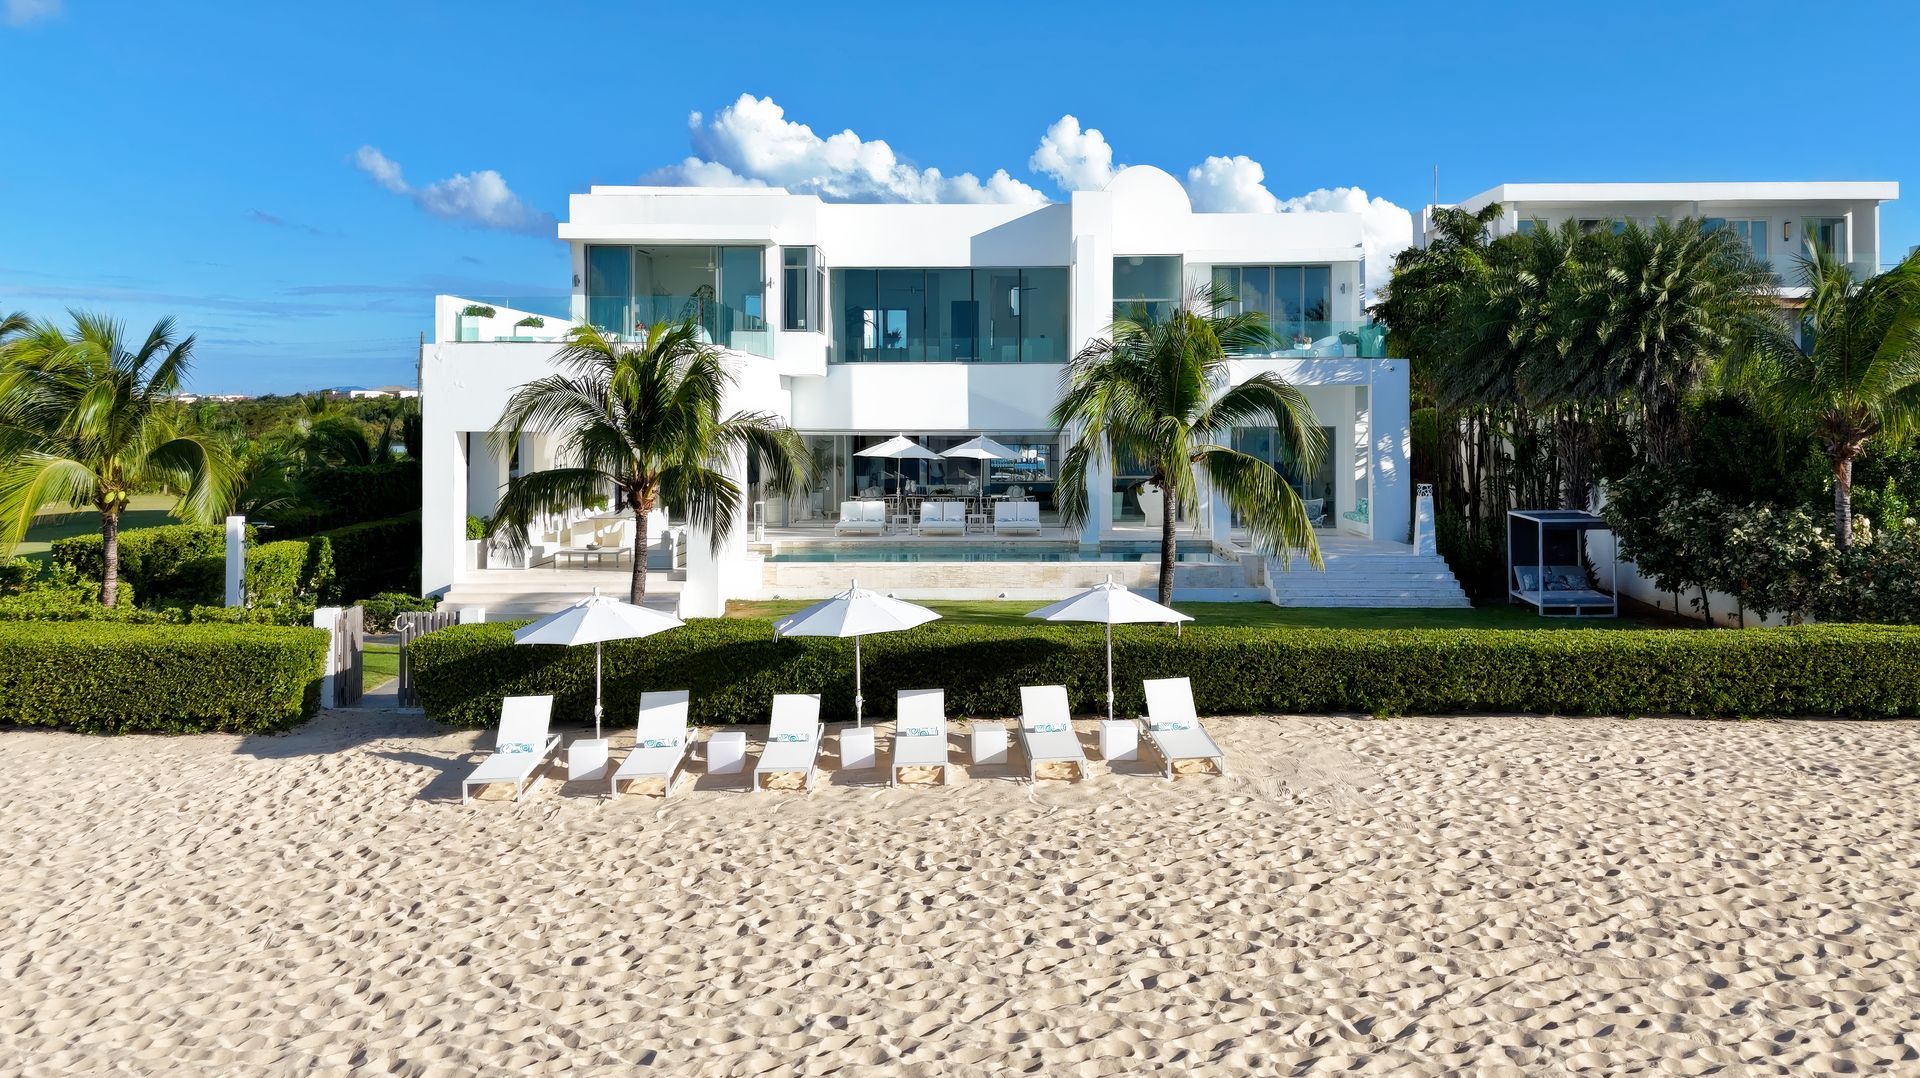 The Beach House Luxury vacation rental, Anguilla